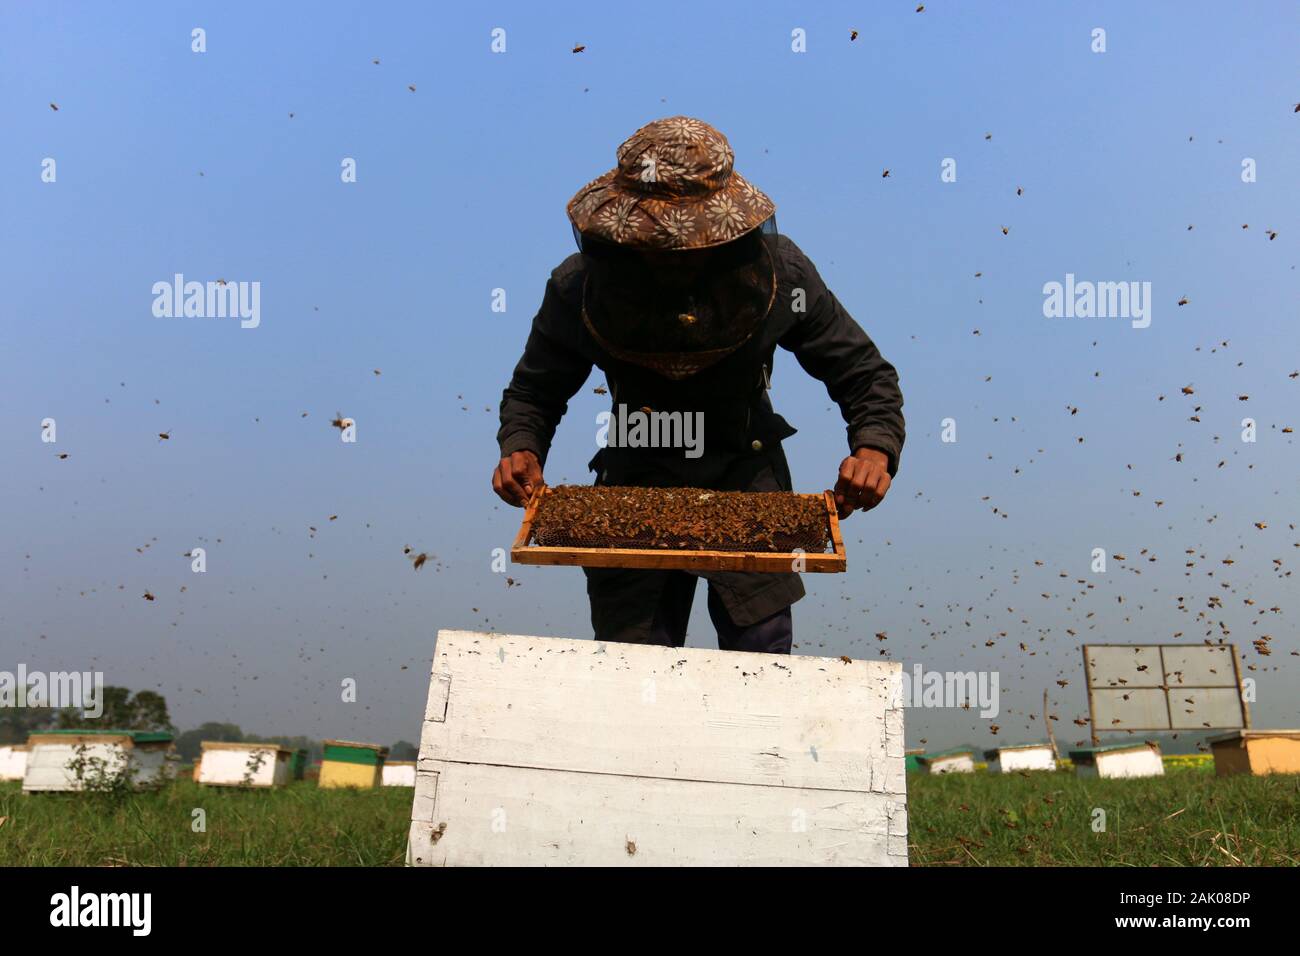 A worker holds a beehive set up at a mustard field in Munshiganj, Dhaka.According to the Bangladesh Institute of Apiculture (BIA), around 25 thousand cultivators including 1,000 commercial agriculturists produce at least 1500 tons of good quality honey a year across the country. Stock Photo